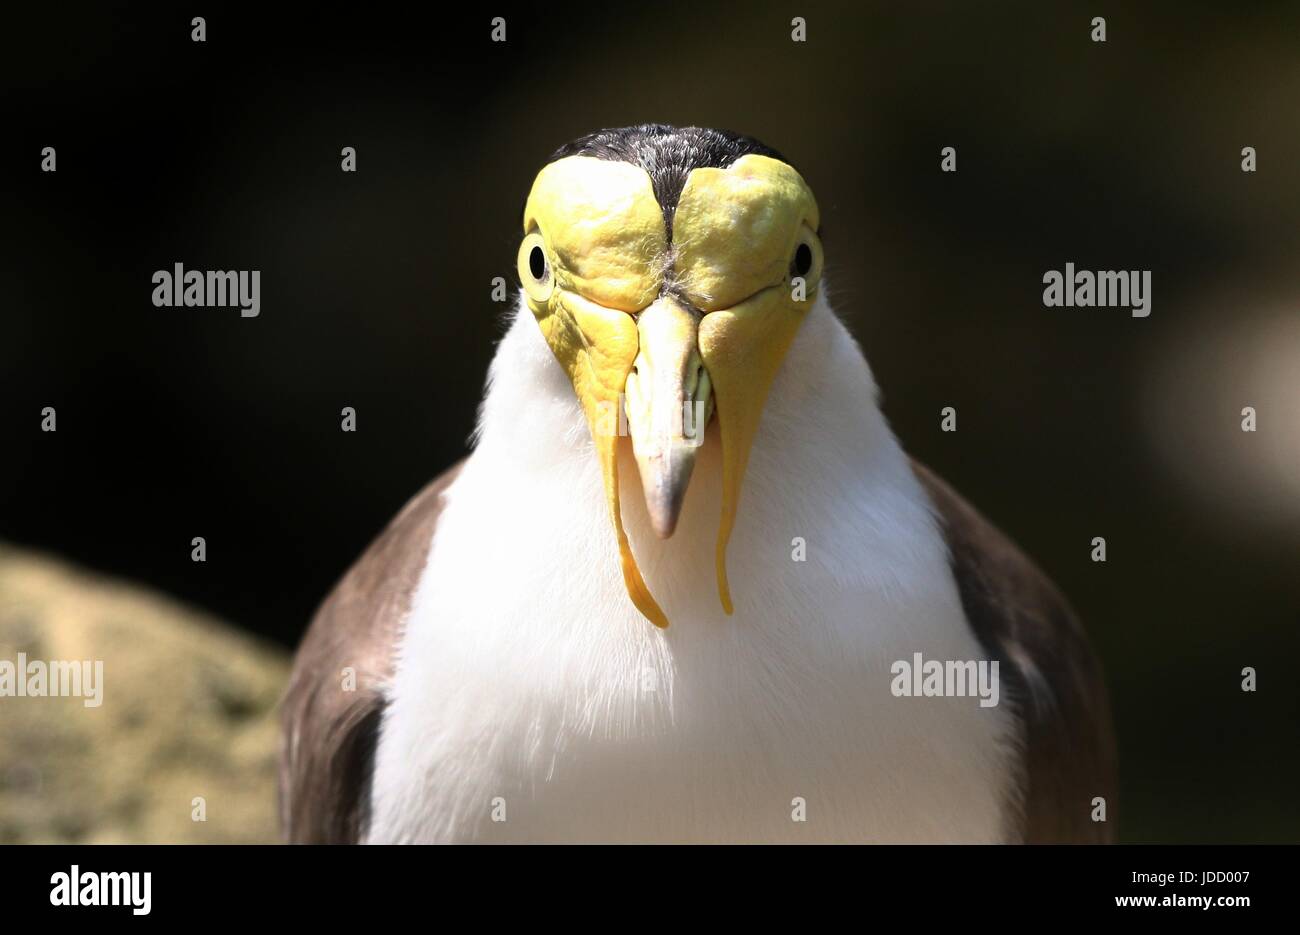 Australasian Masked Lapwing (Vanellus miles), extreme close-up the head, facing the camera. Stock Photo